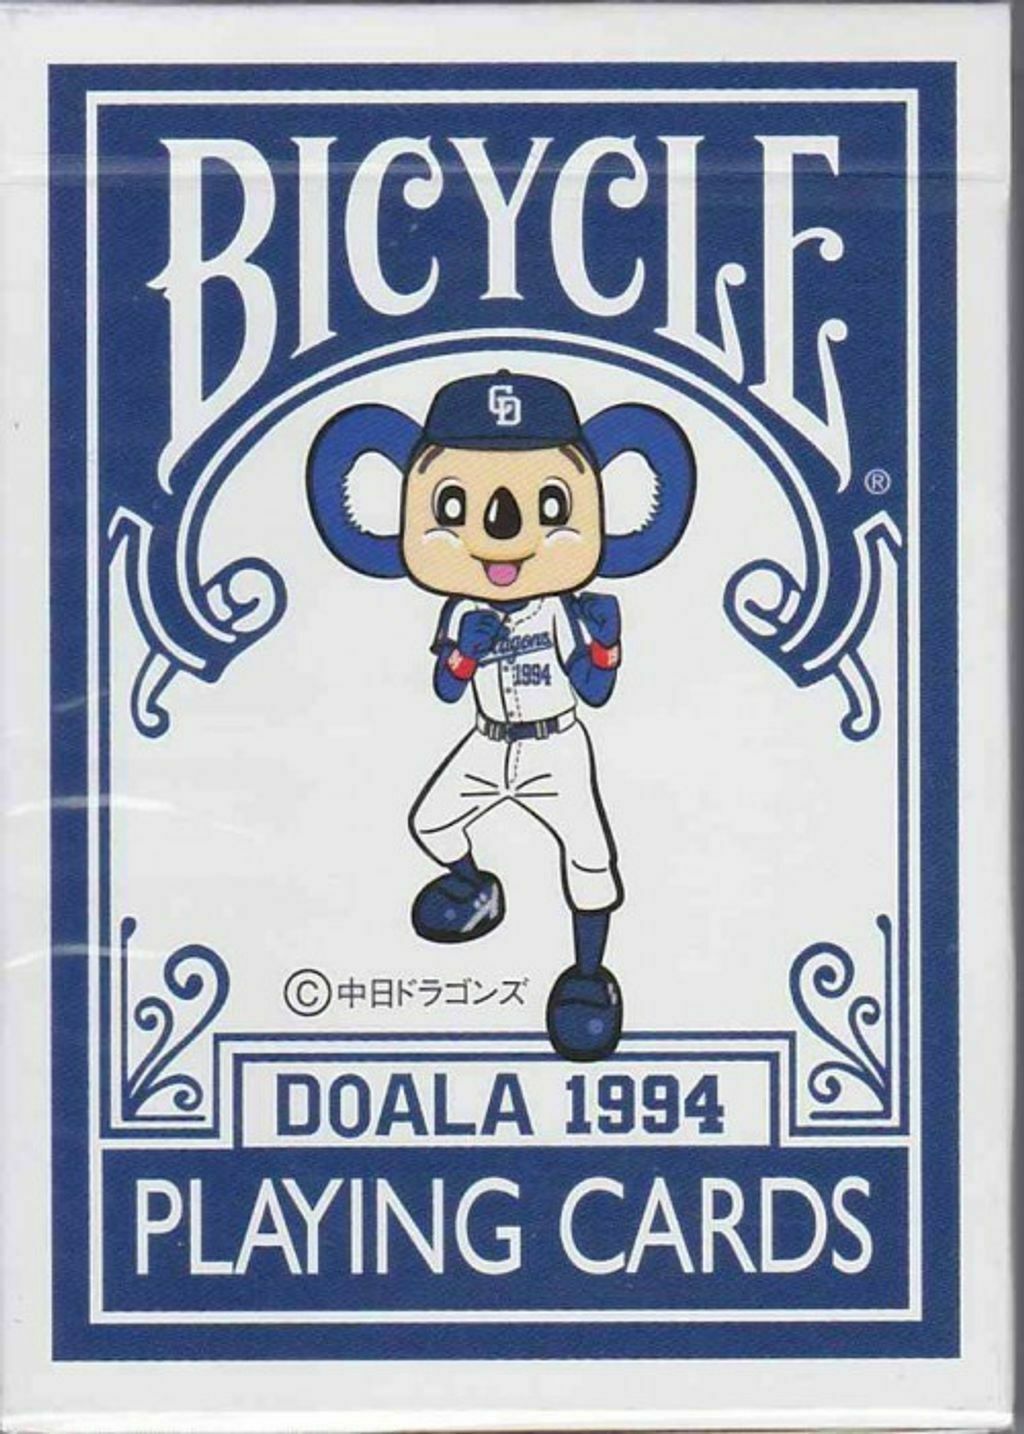 Bicycle Doala 1994 Playing Cards Deck